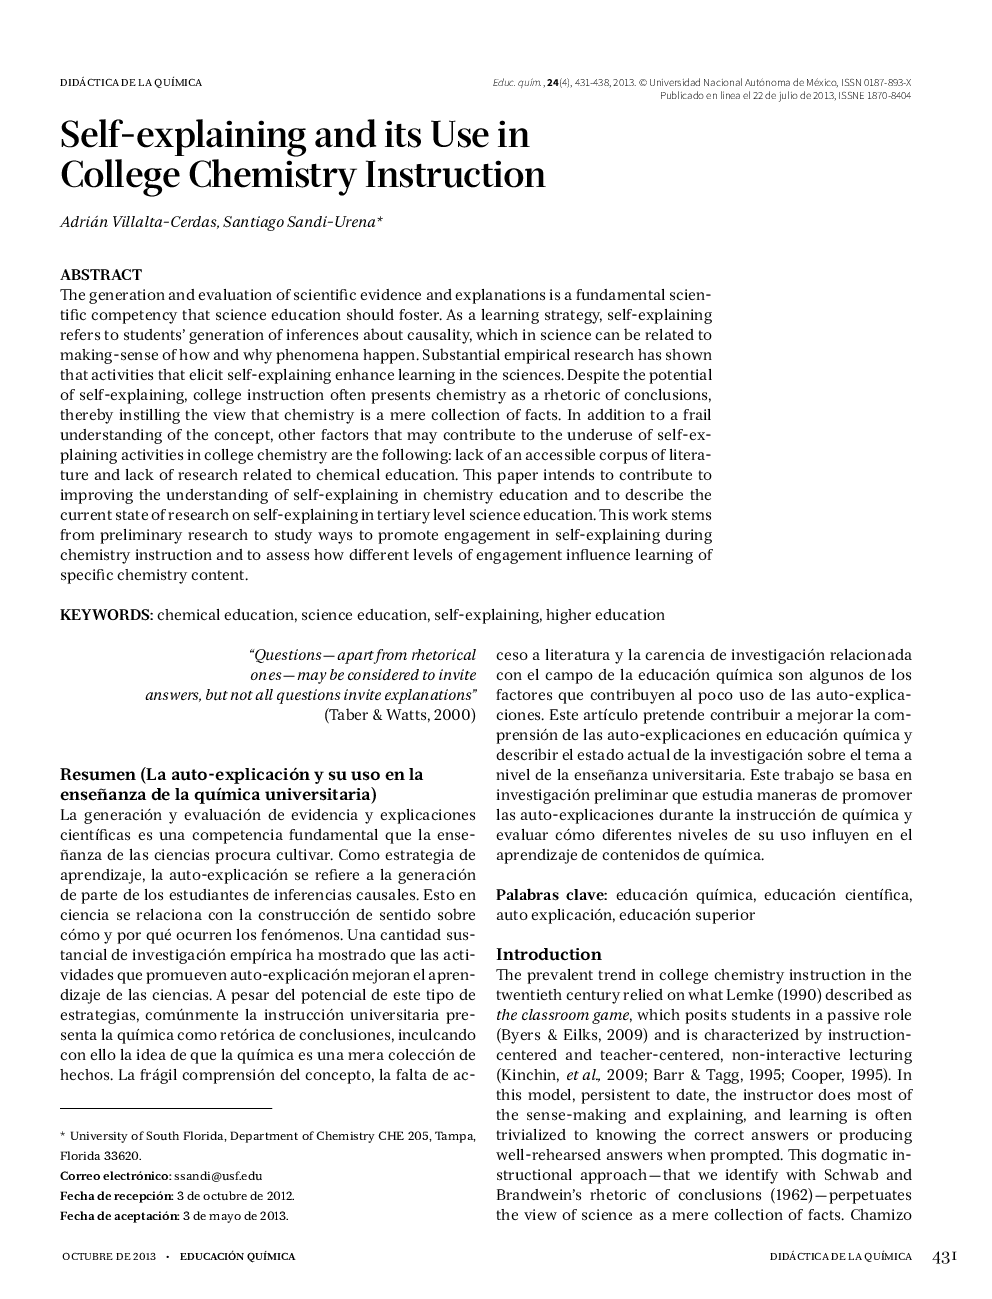 Self-explaining and its Use in College Chemistry Instruction